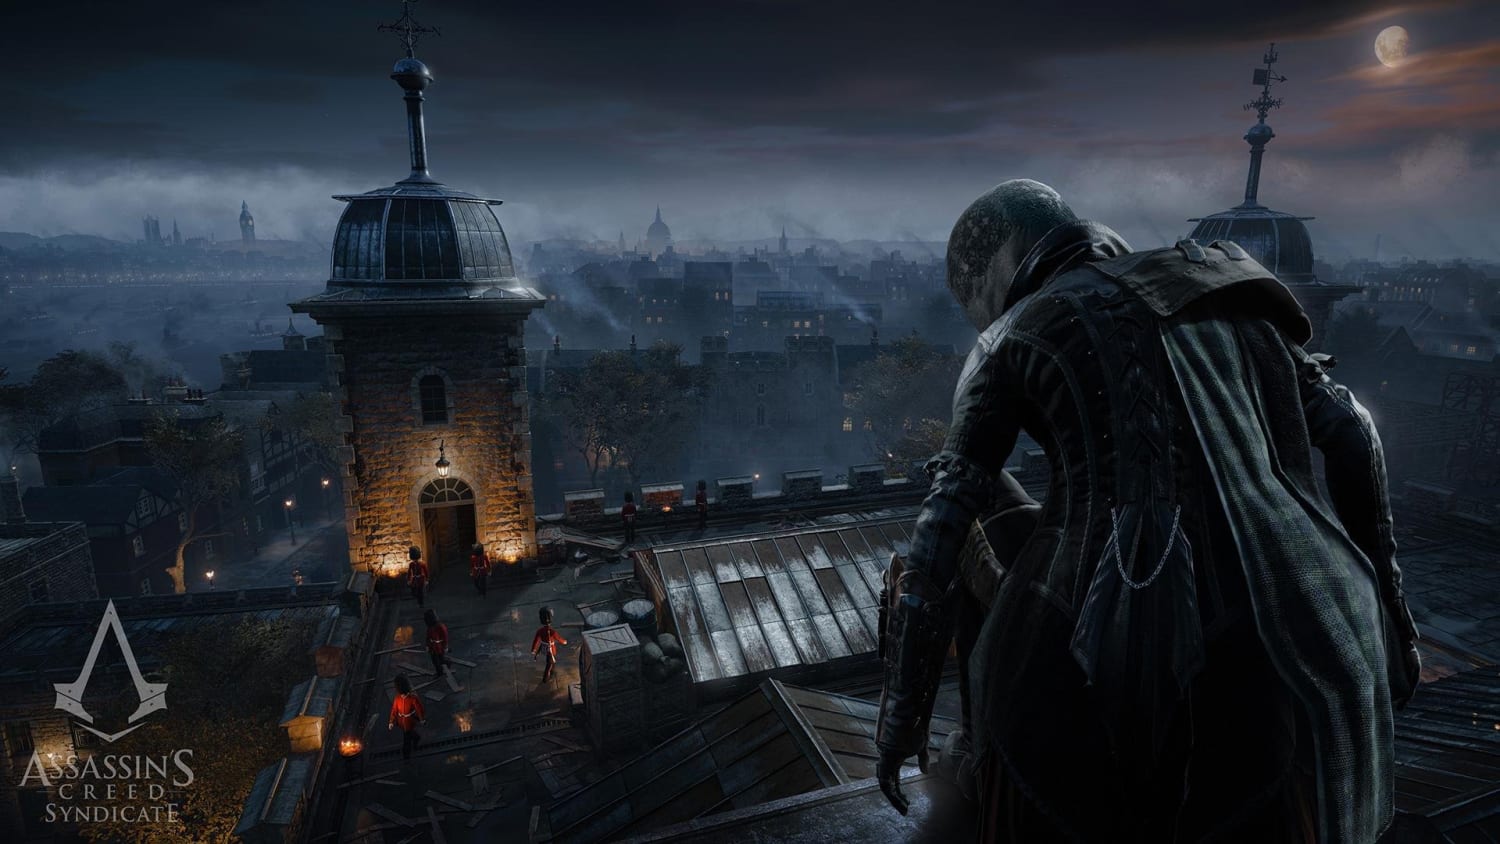 guide Udvikle End Freedom Returns to Assassin's Creed in Syndicate